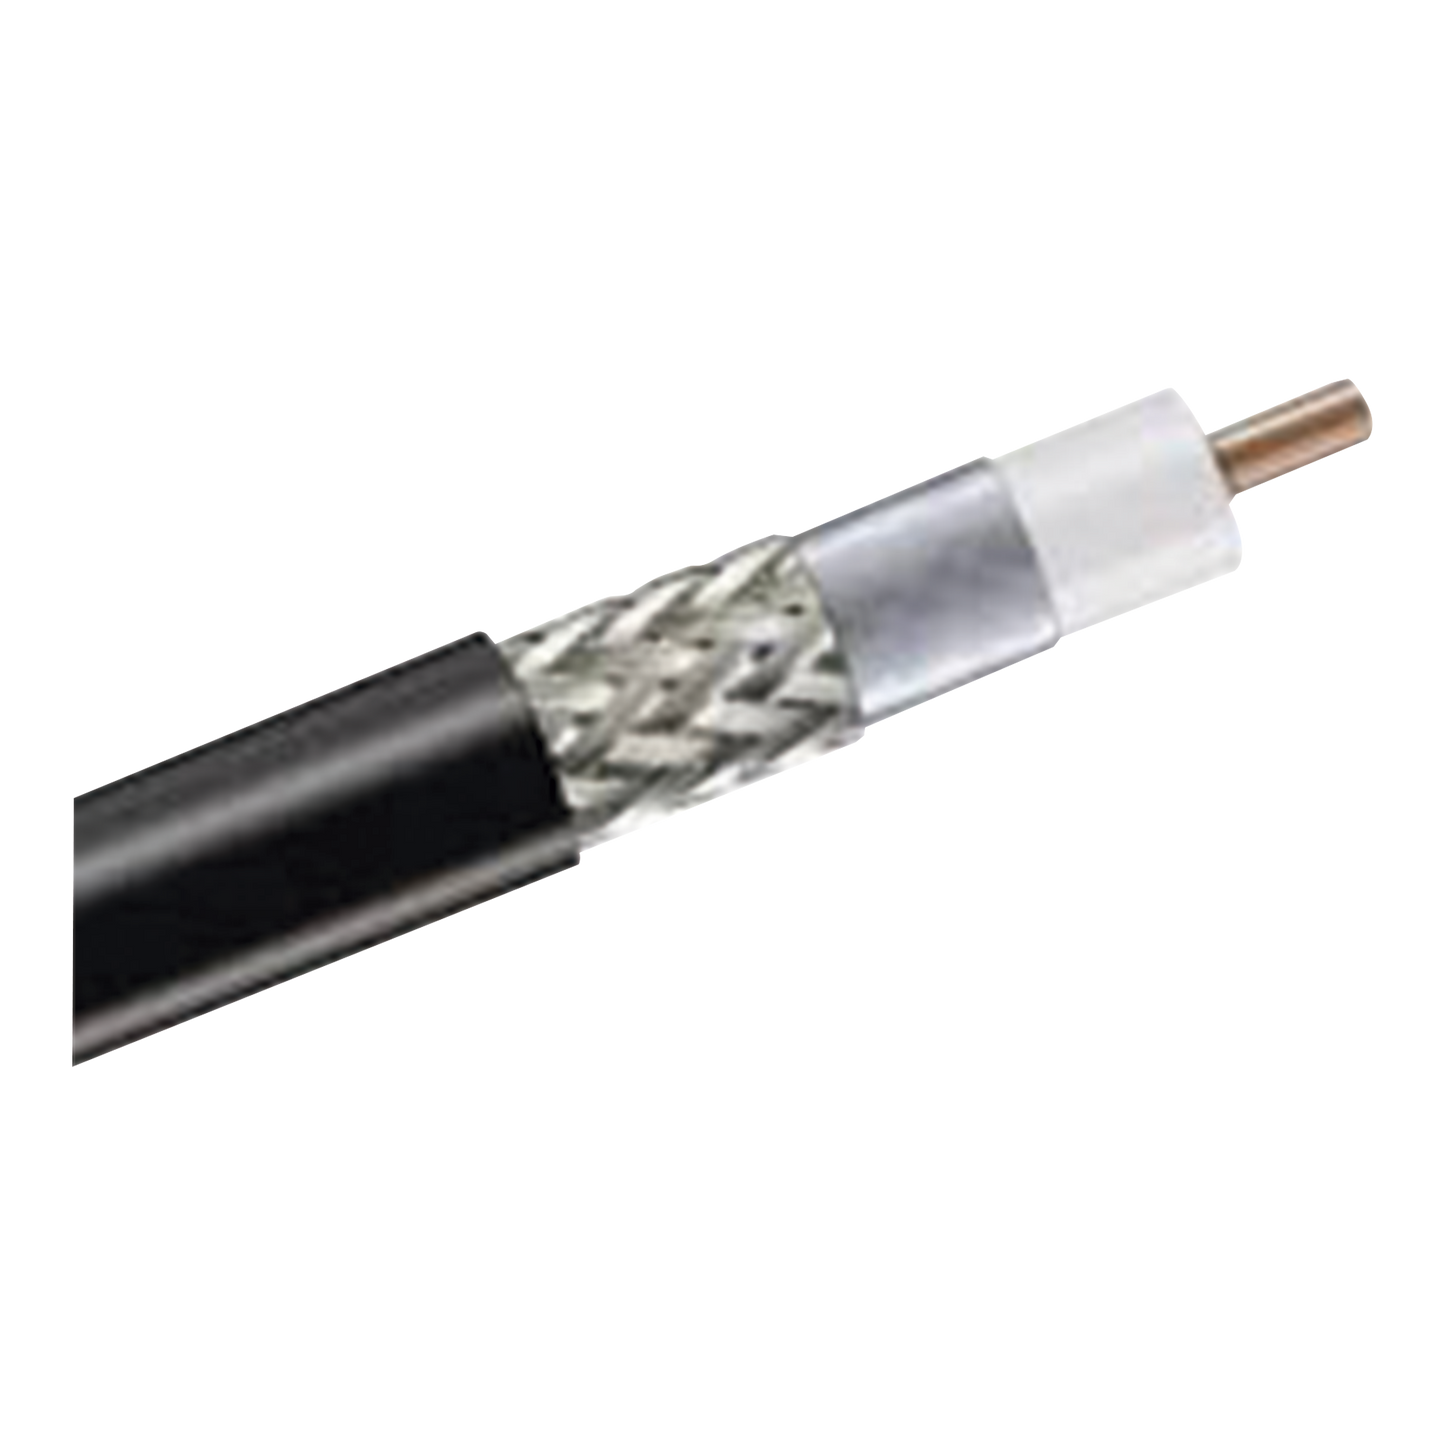 LINKEDPRO Coaxial Cable 1000 ft Reel RG-8 50 Ohms with Copper Clad Aluminum Conductor and Tinned Copper Coated Aluminum Mesh